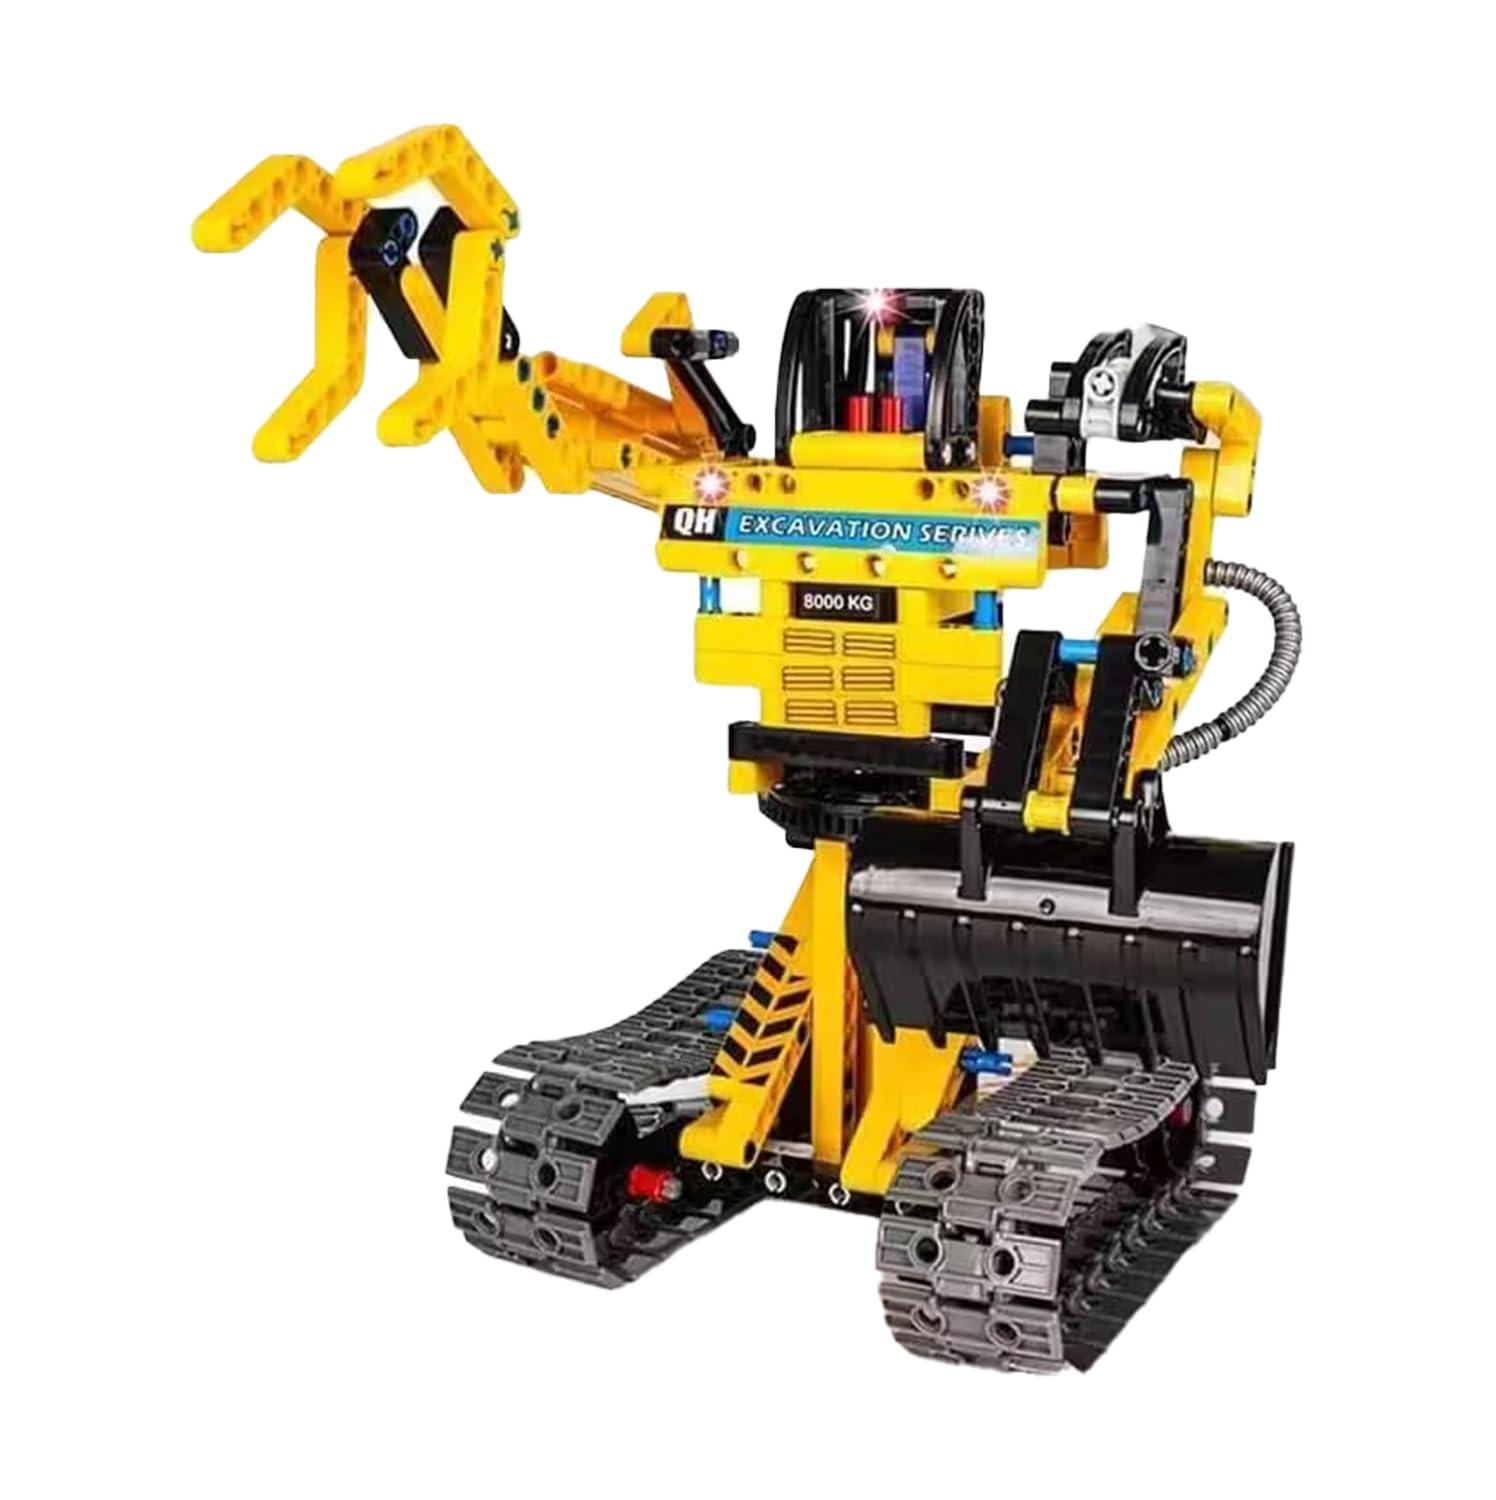 OKKIDY Building Toys Sets Excavators Robot 2-in-1, Technic Building Blocks, 342 PCS STEM Building Blocks Crane Toy Crawler Excavator & Robot Gift for Children 6 7 8 9 10 Years Old 1